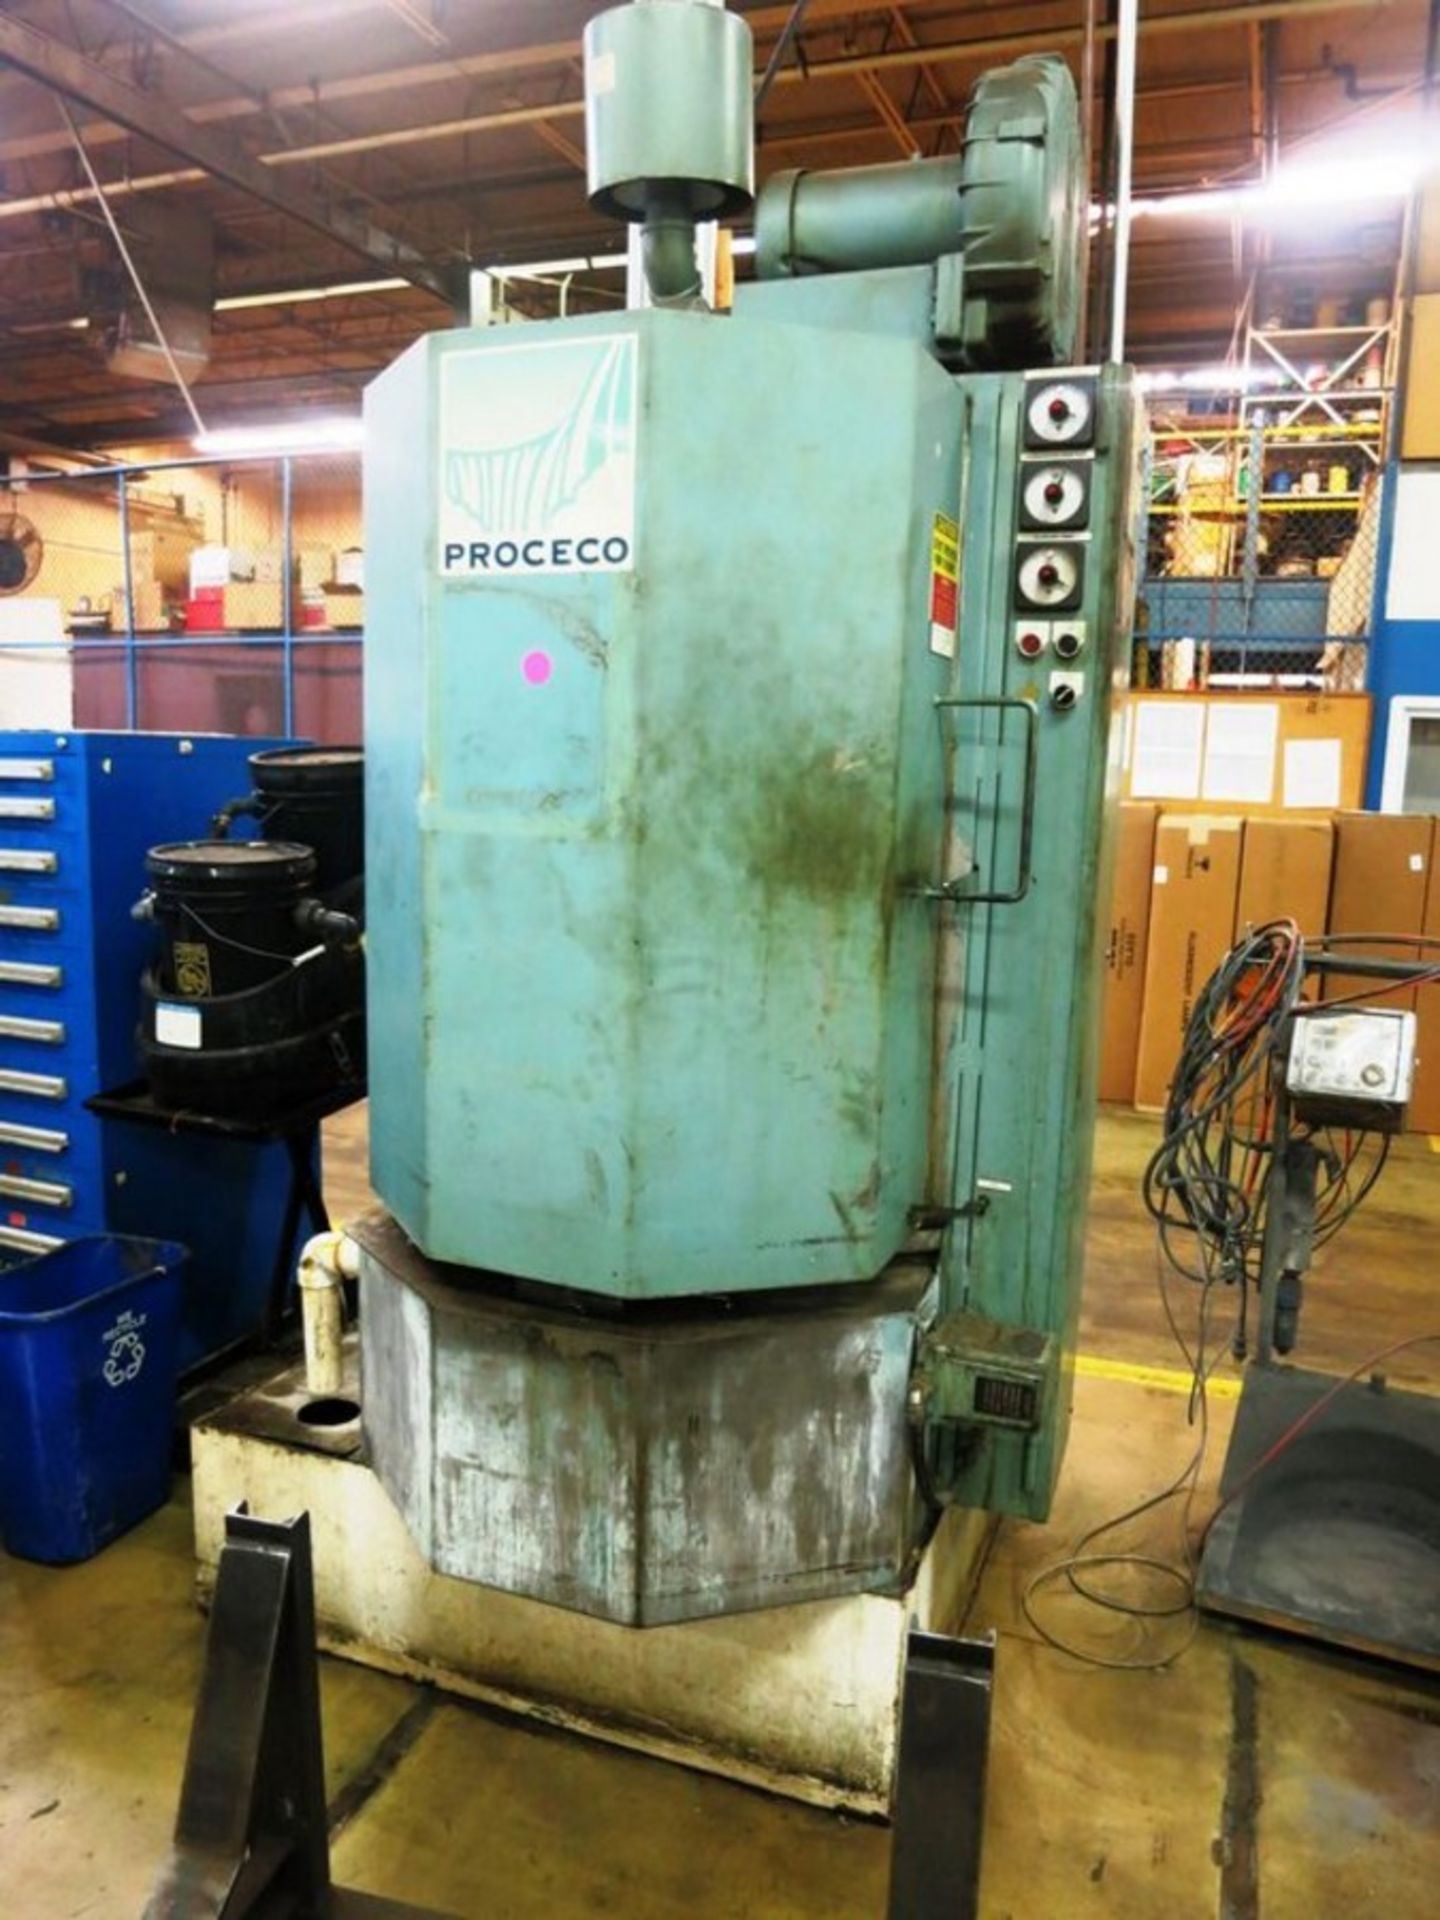 36" Proceco Model PC-28-36-E-500-R-SS-BO Batch Type Parts Washer, S/N 96-109, new 1996 General